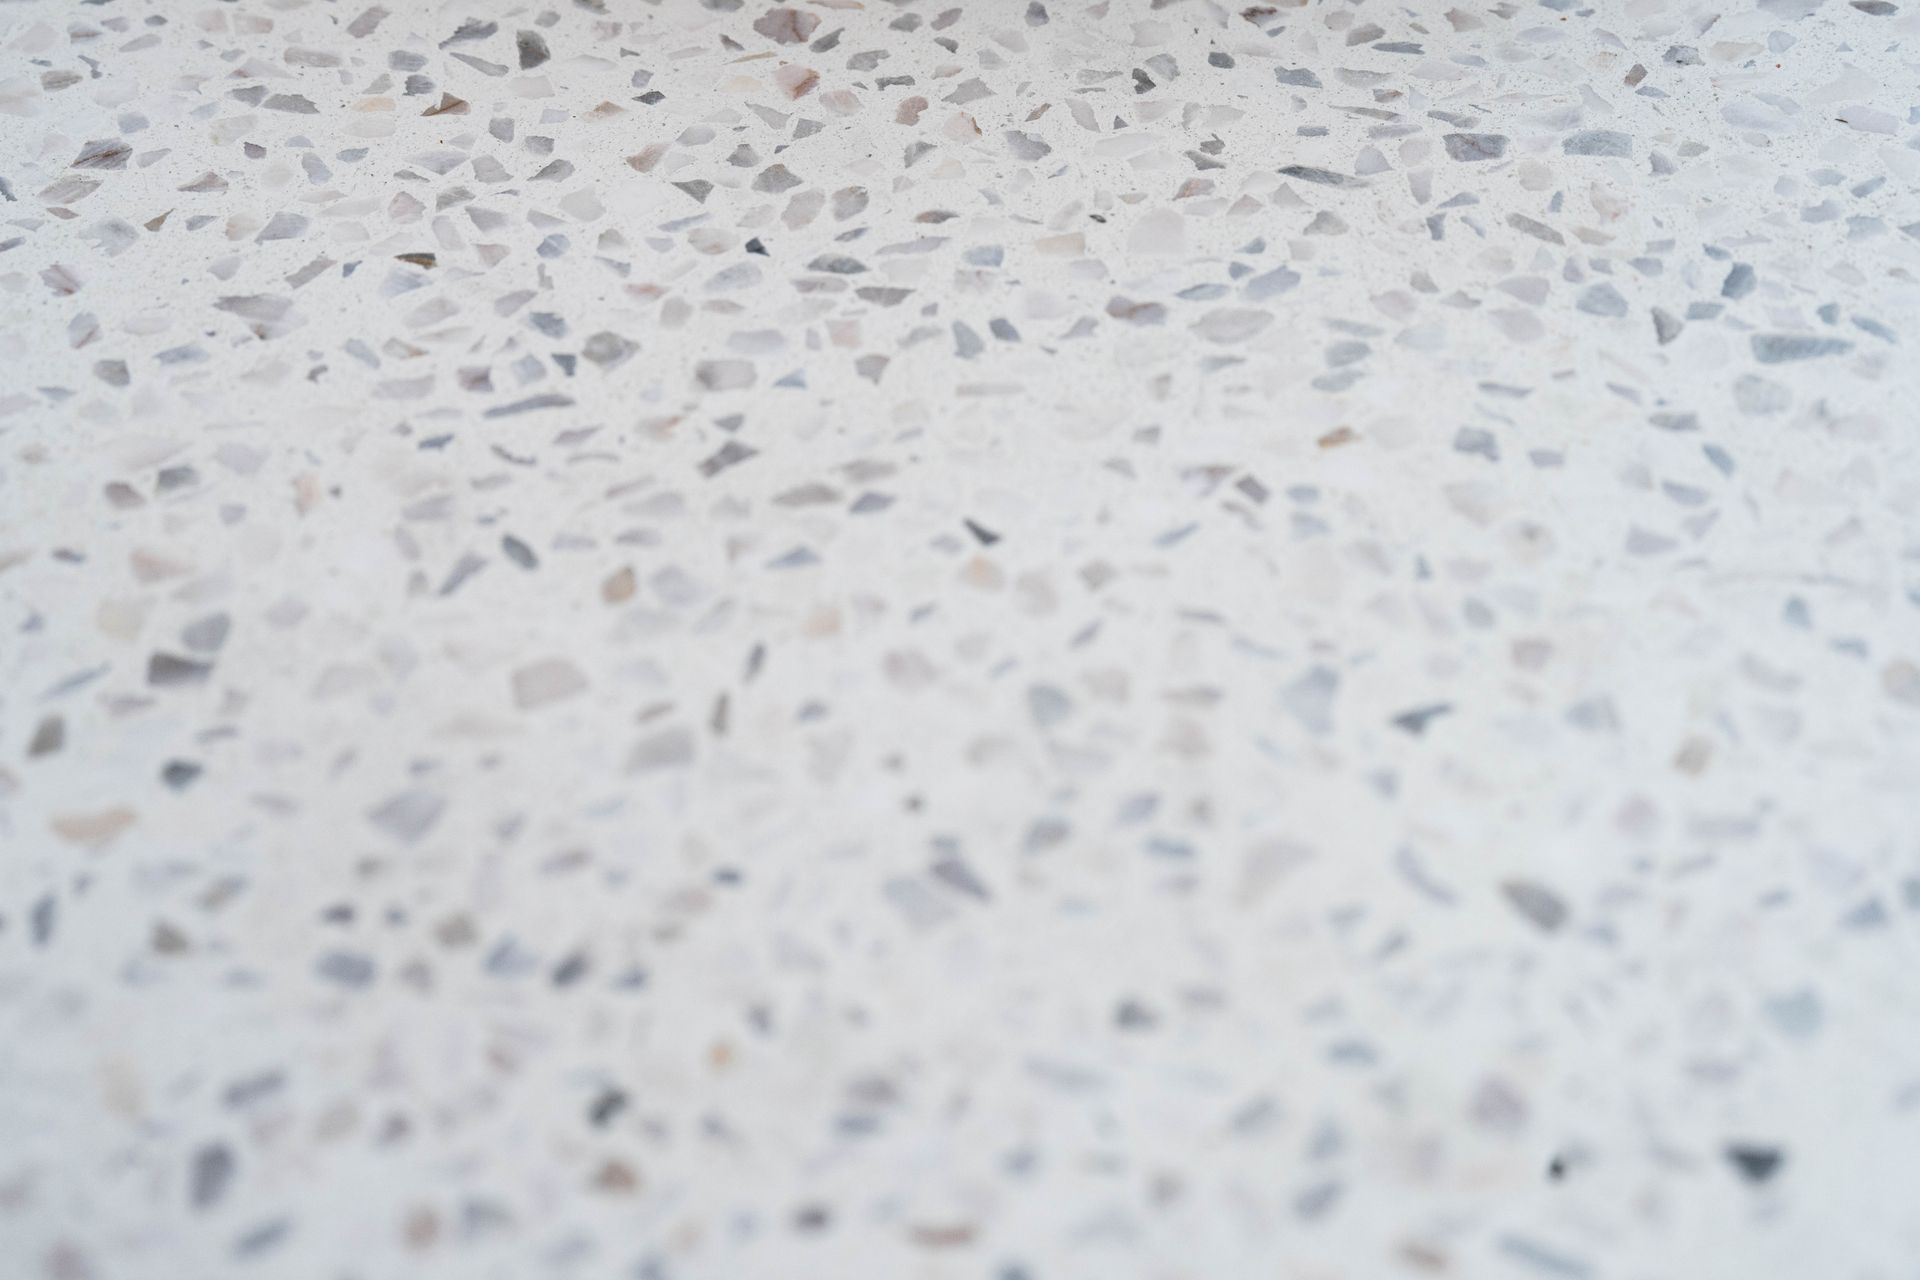 a white surface with a lot of small rocks on it